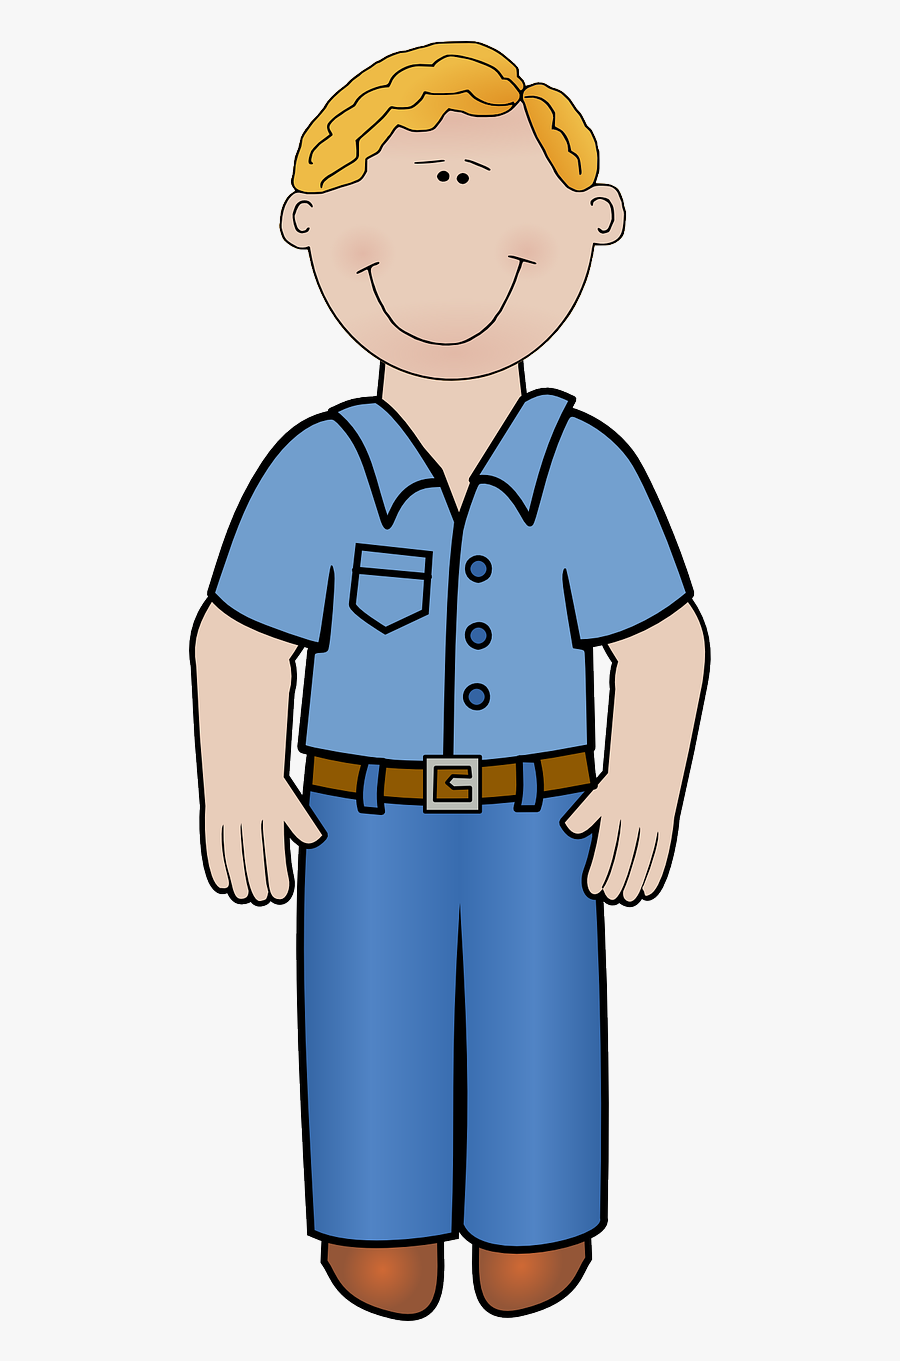 Boy Adult Man People Smiling Png Image - Daddy Clipart, Transparent Clipart